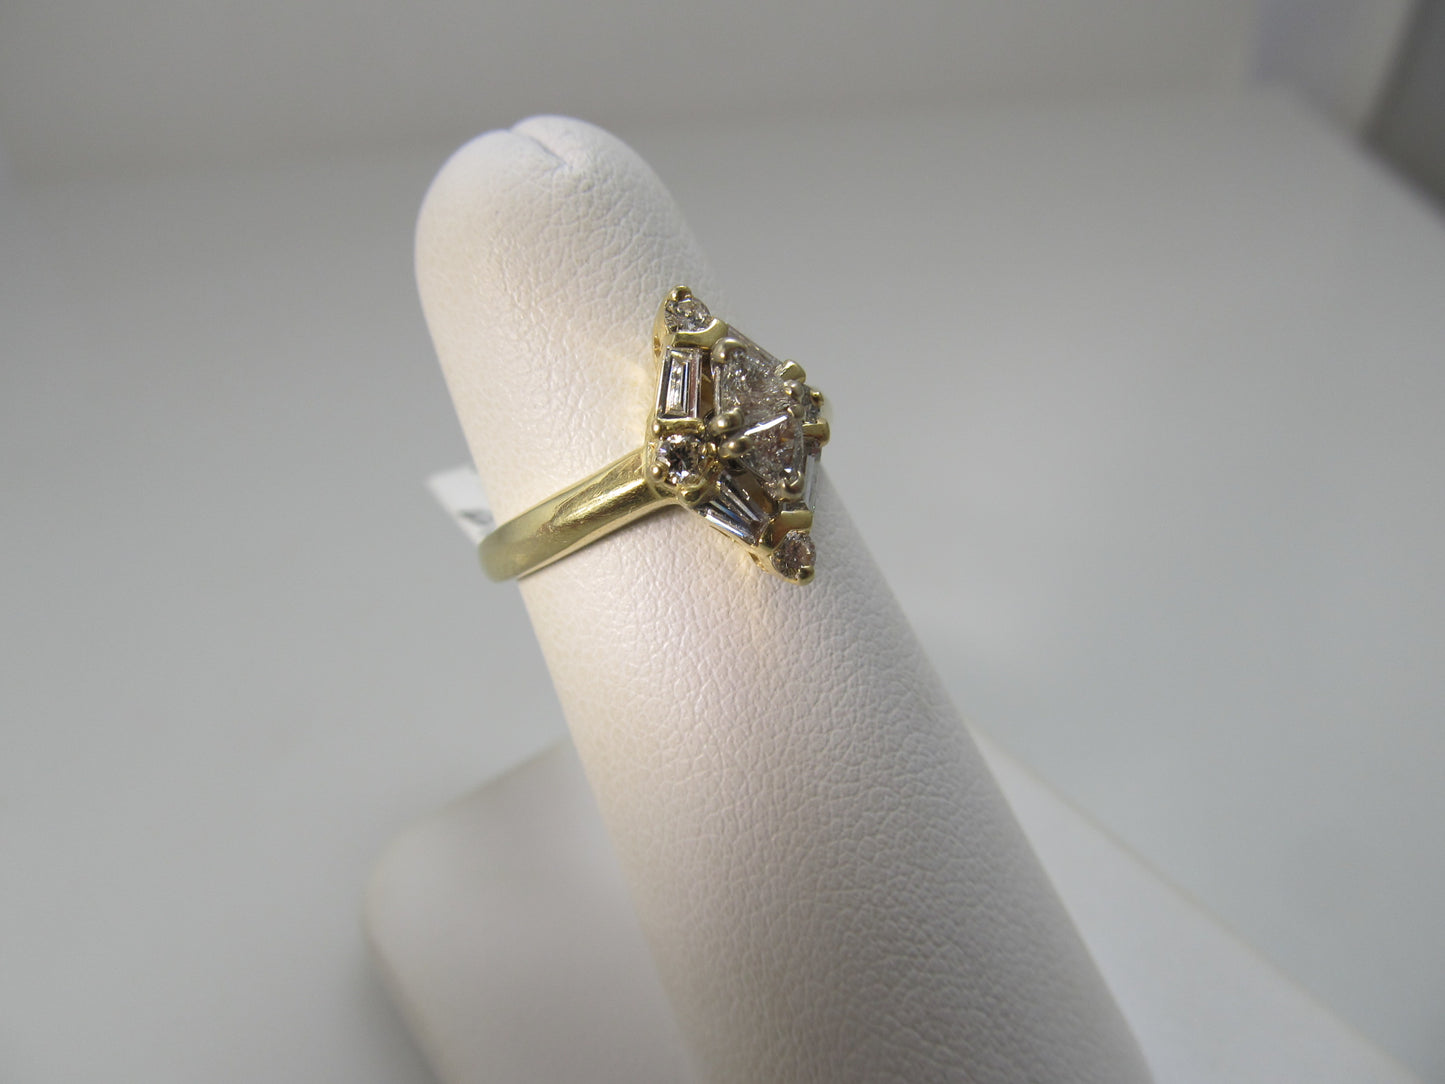 Vintage marquise shaped diamond ring, 14k yellow gold